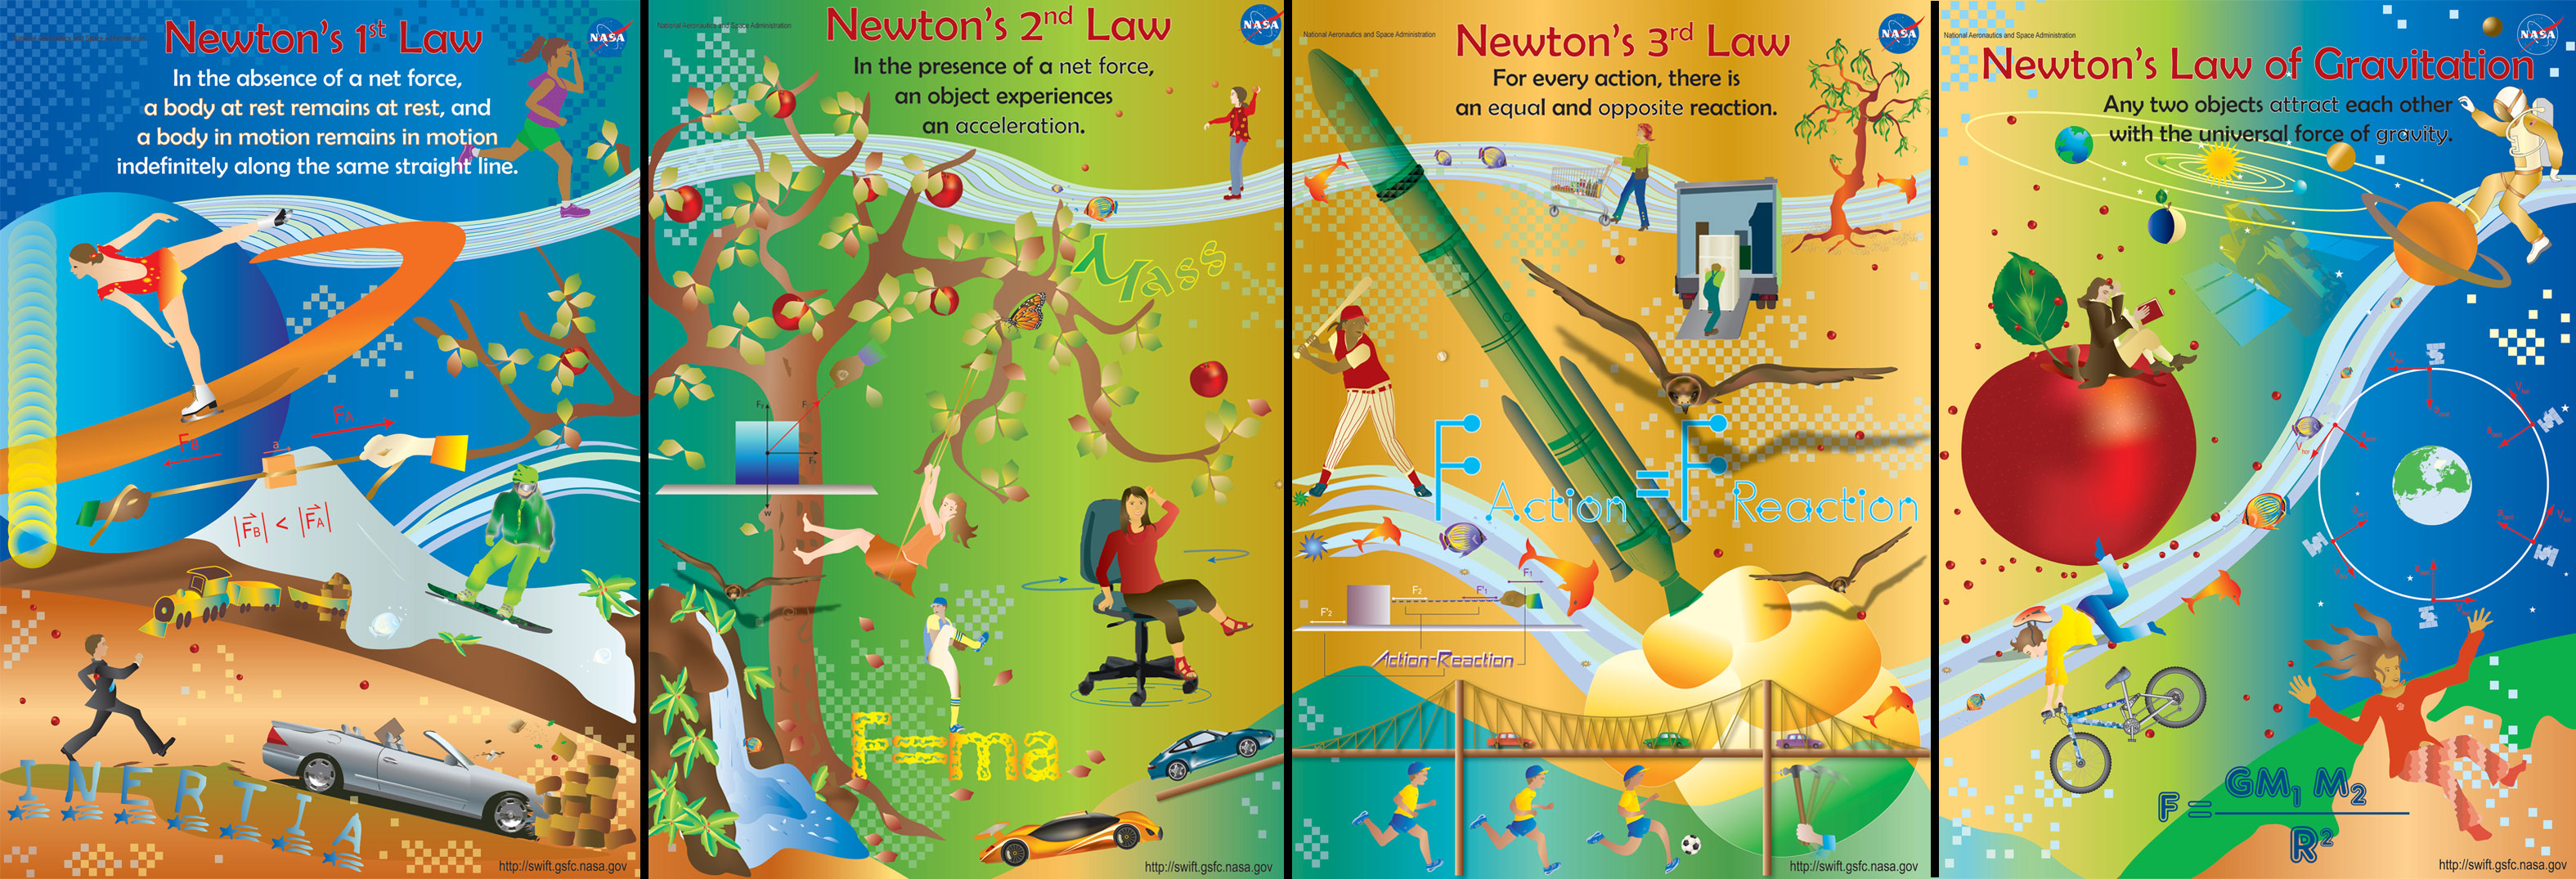 collage of the Newton's law posters